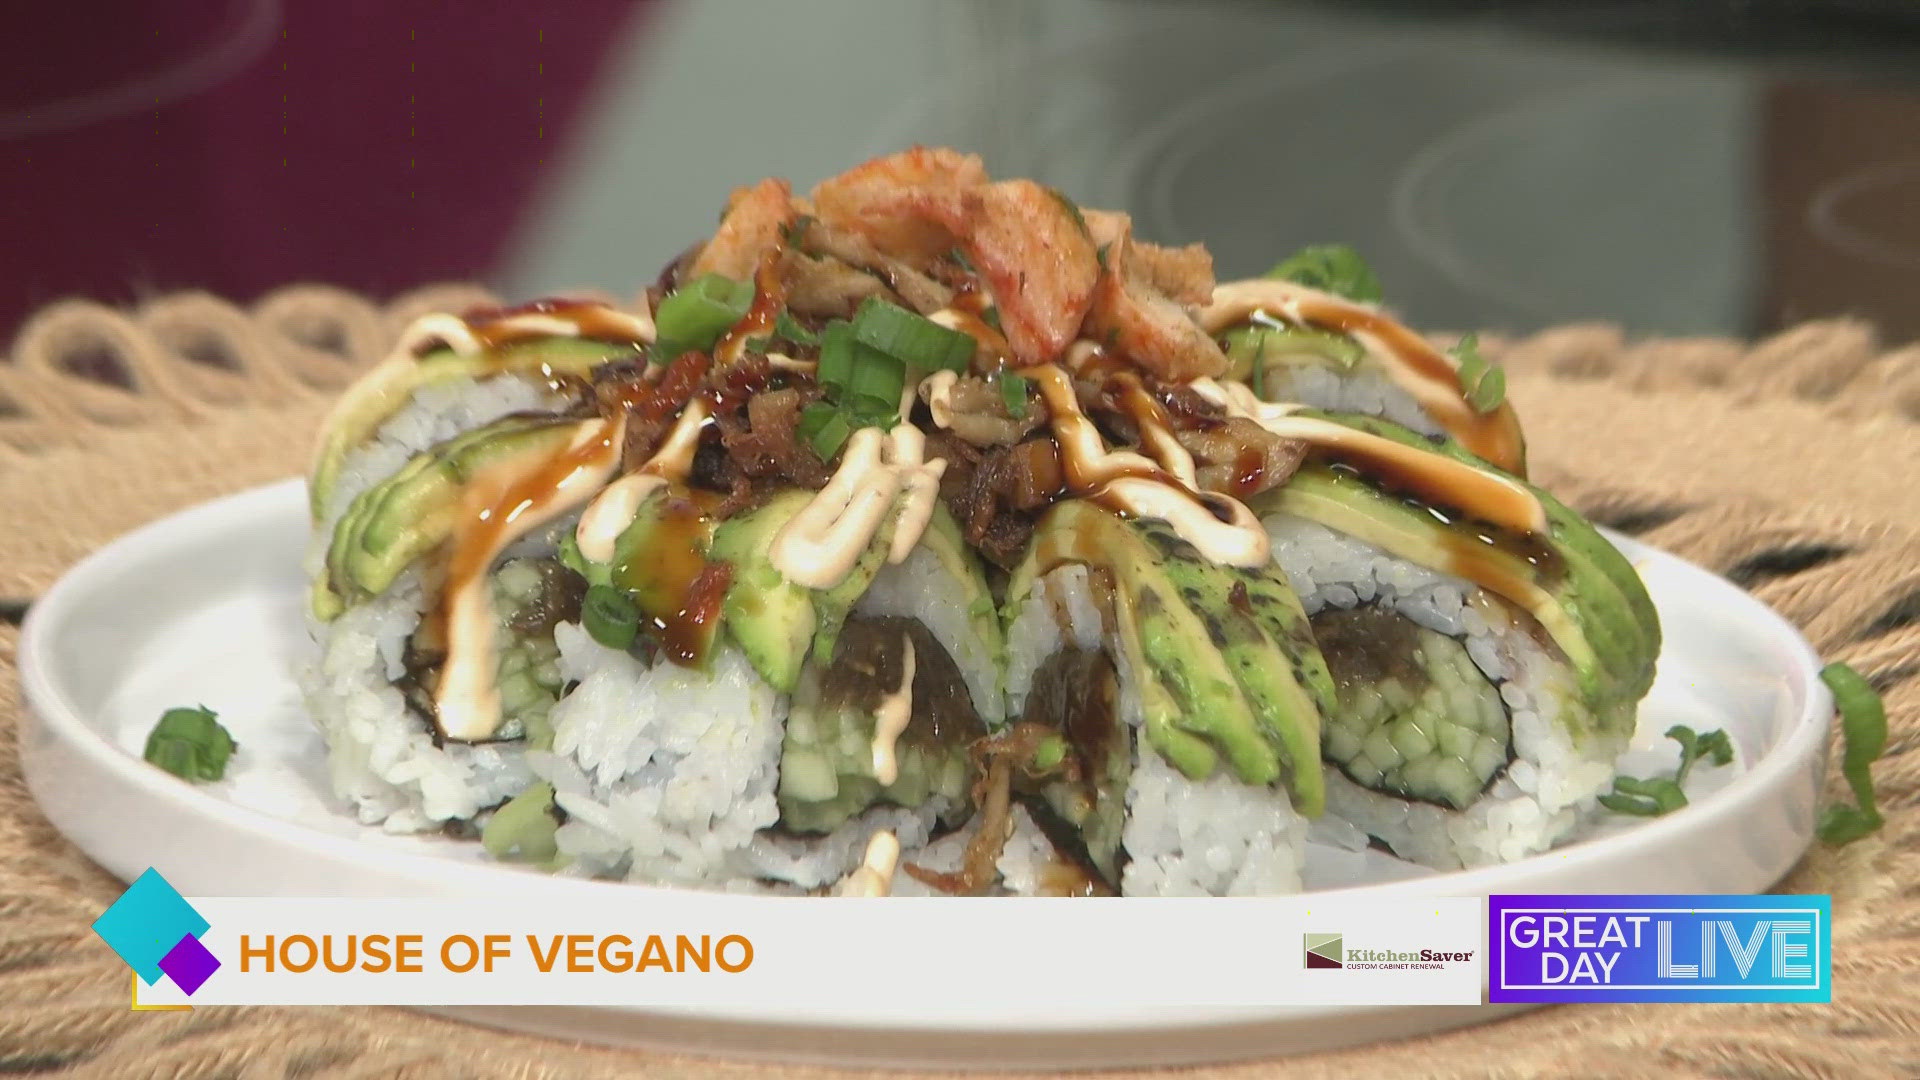 Located in St. Pete, House of Vegano serves 100% plant based sushi! For more information visit houseofvegano.com